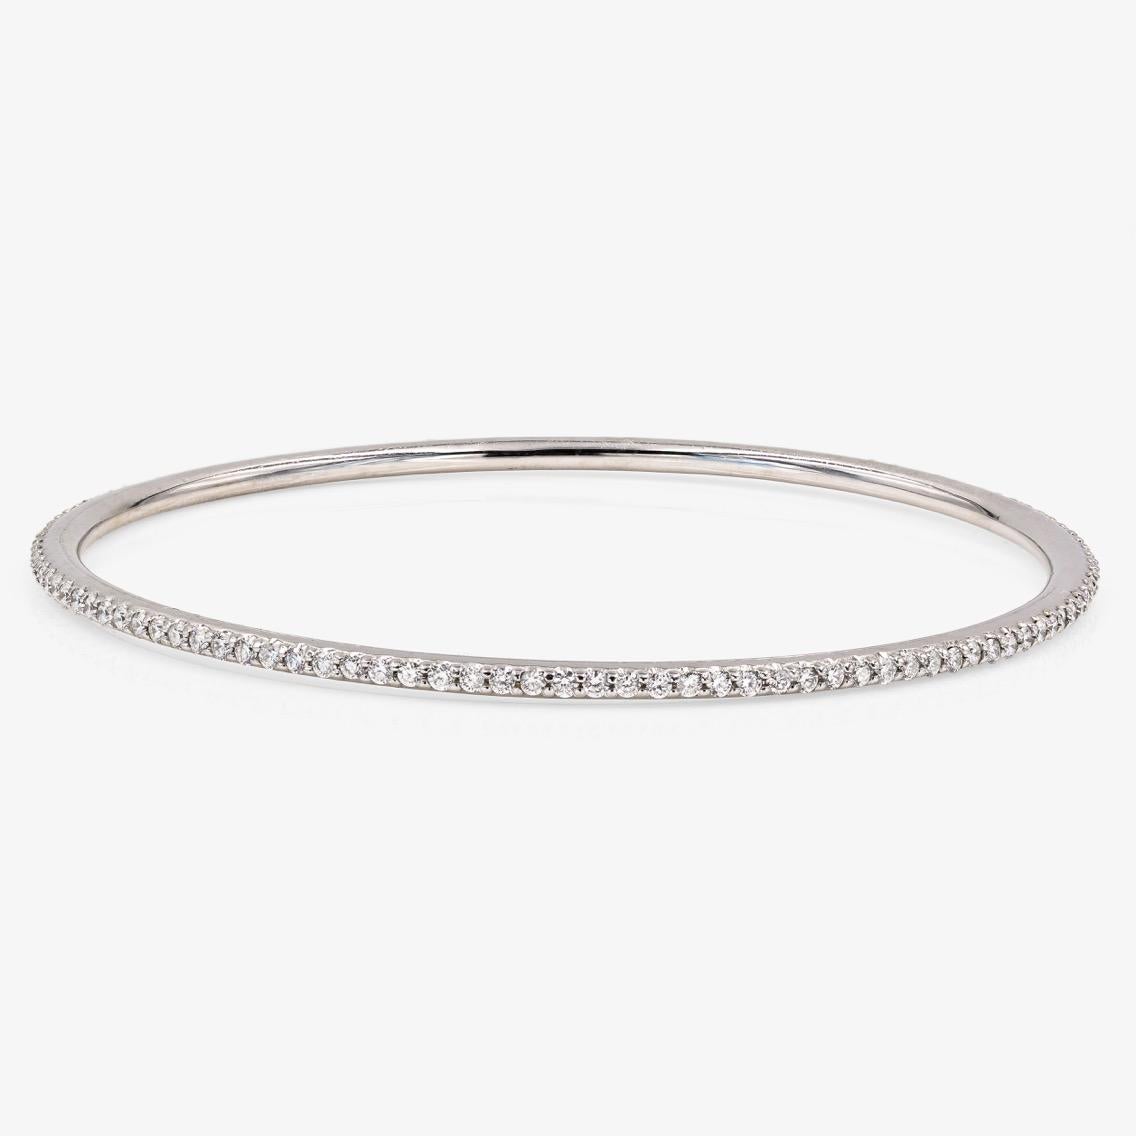 This Lester Lampert original D-Bead™ style bangle bracelet in 18kt. white gold contains 114 ideal cut round diamonds = 1.90cts. t.w. There is no clasp.

Every Lester Lampert piece will arrive in an elegant custom jewelry box.